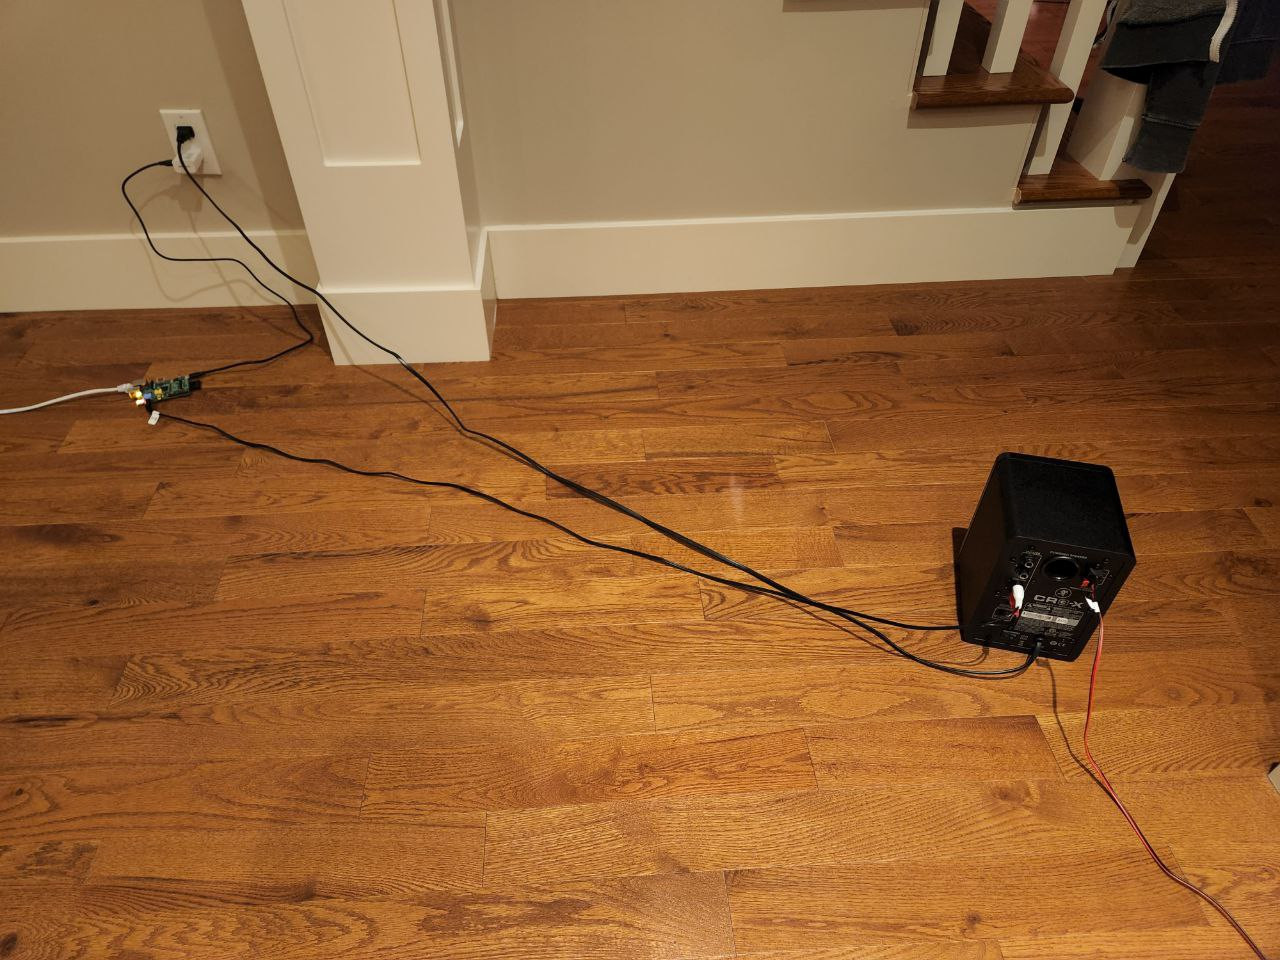 a speaker connected to a circuit board on my hardwood floor